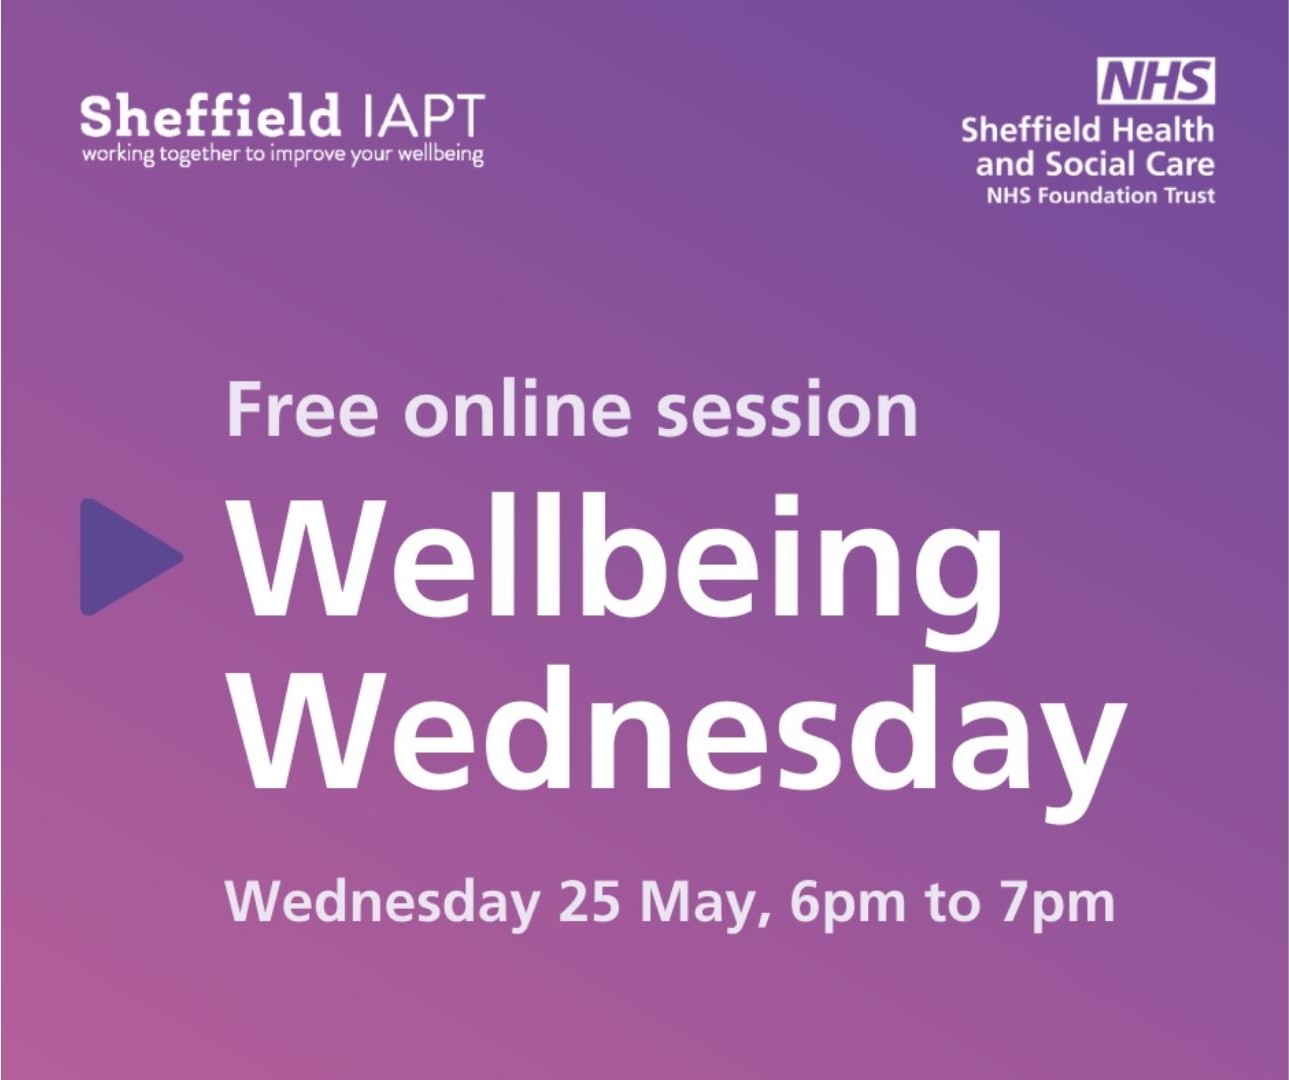 Wellbeing Wednesday IAPT Session